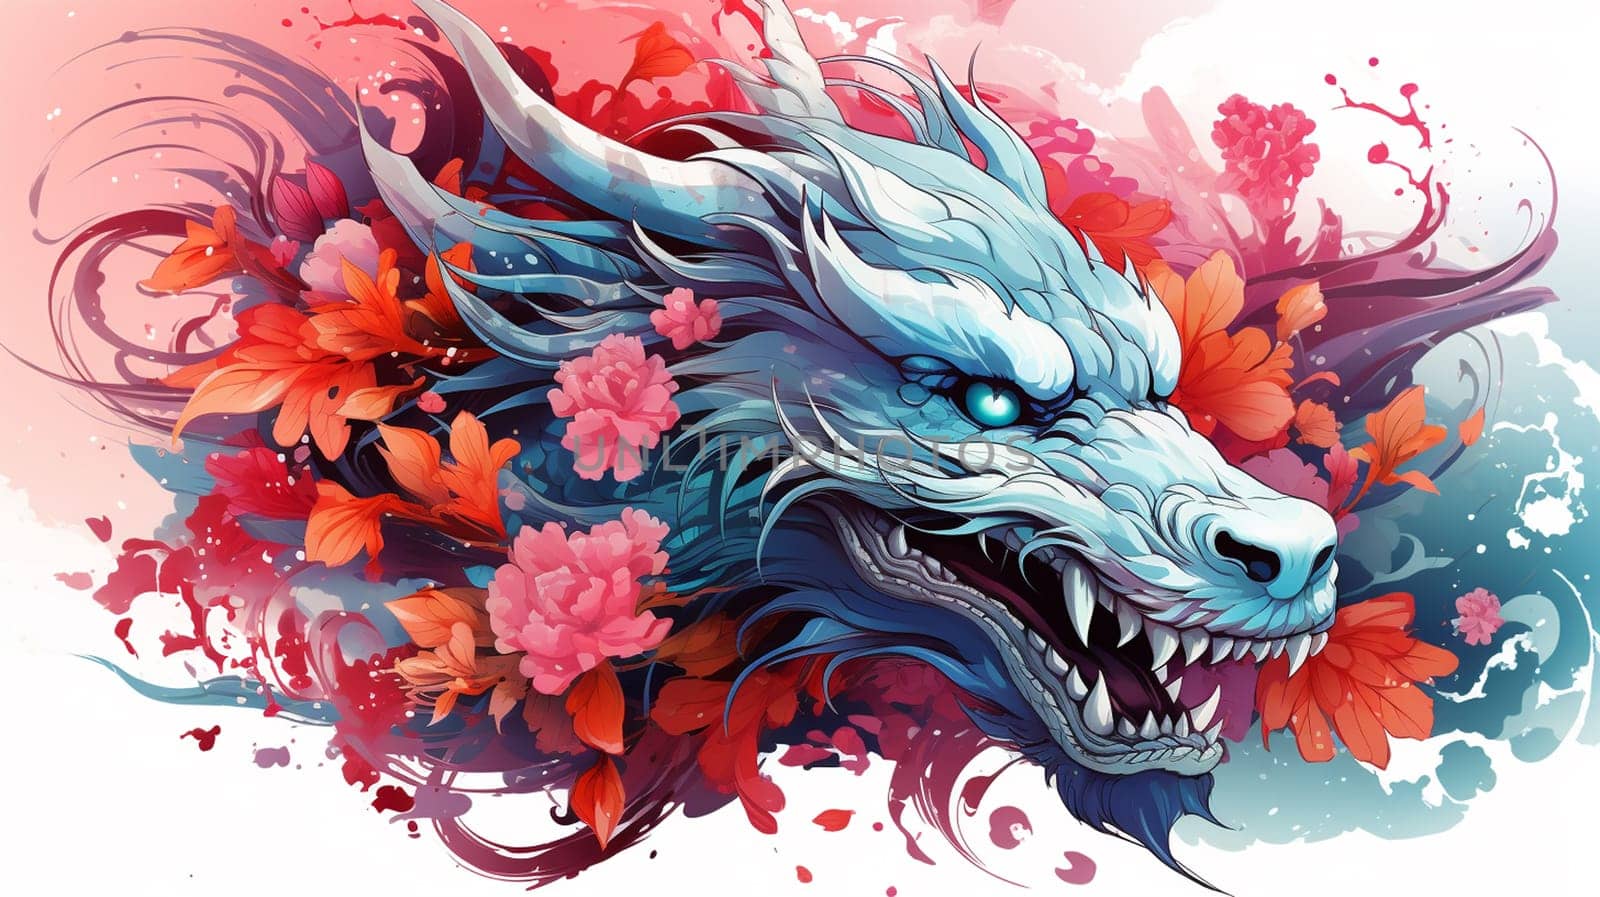 Illustration of a dragon head with colorful floral background, vector illustration , Generate AI by Mrsongrphc